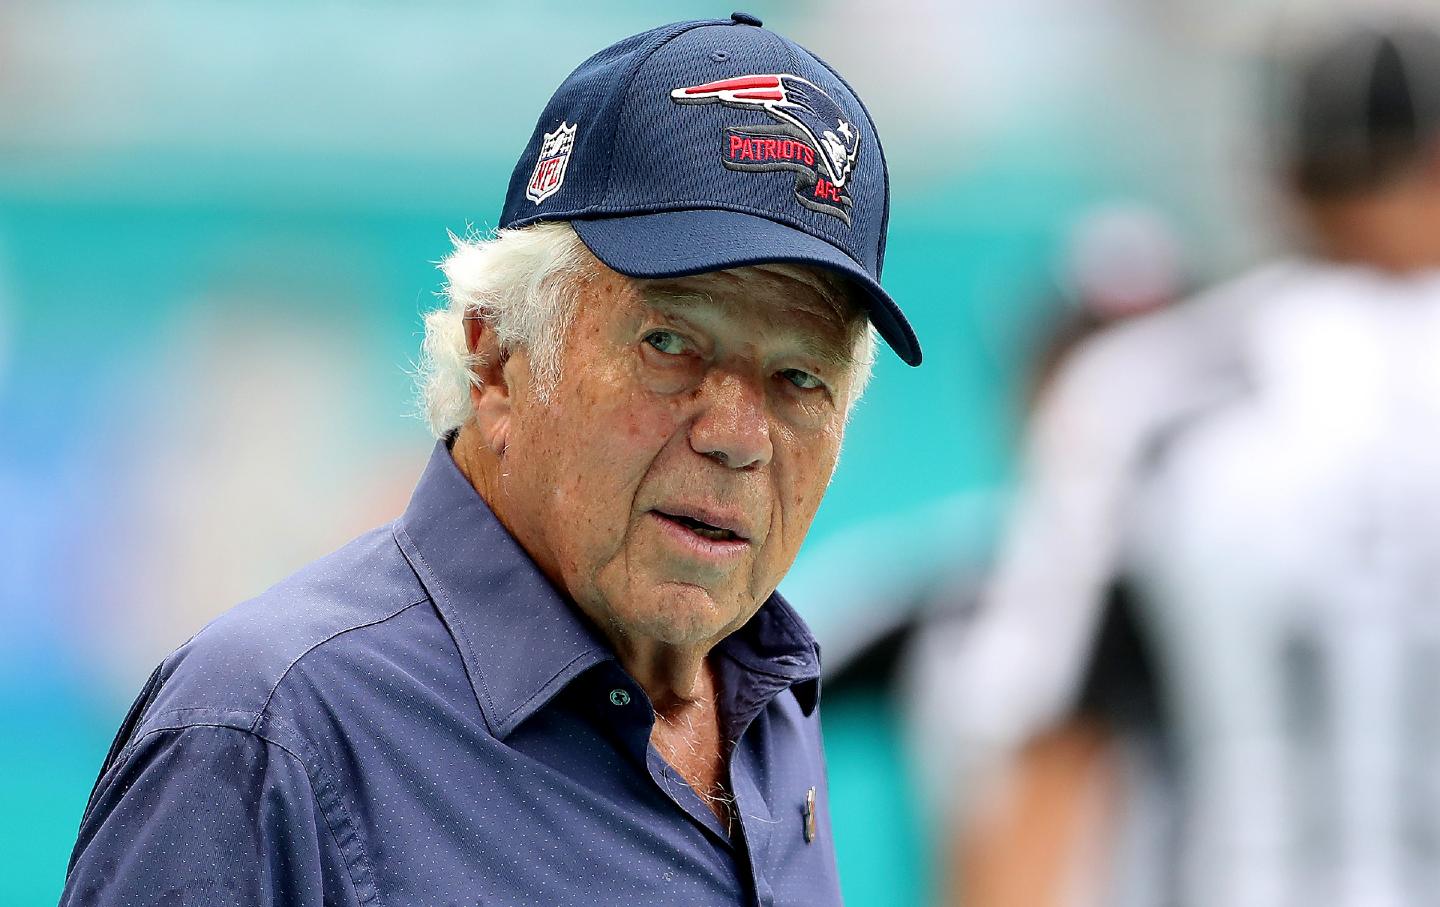 New England Patriots owner Robert Kraft looks on prior to a game against the Miami Dolphins on September 11, 2022, in Miami Gardens, Fla.